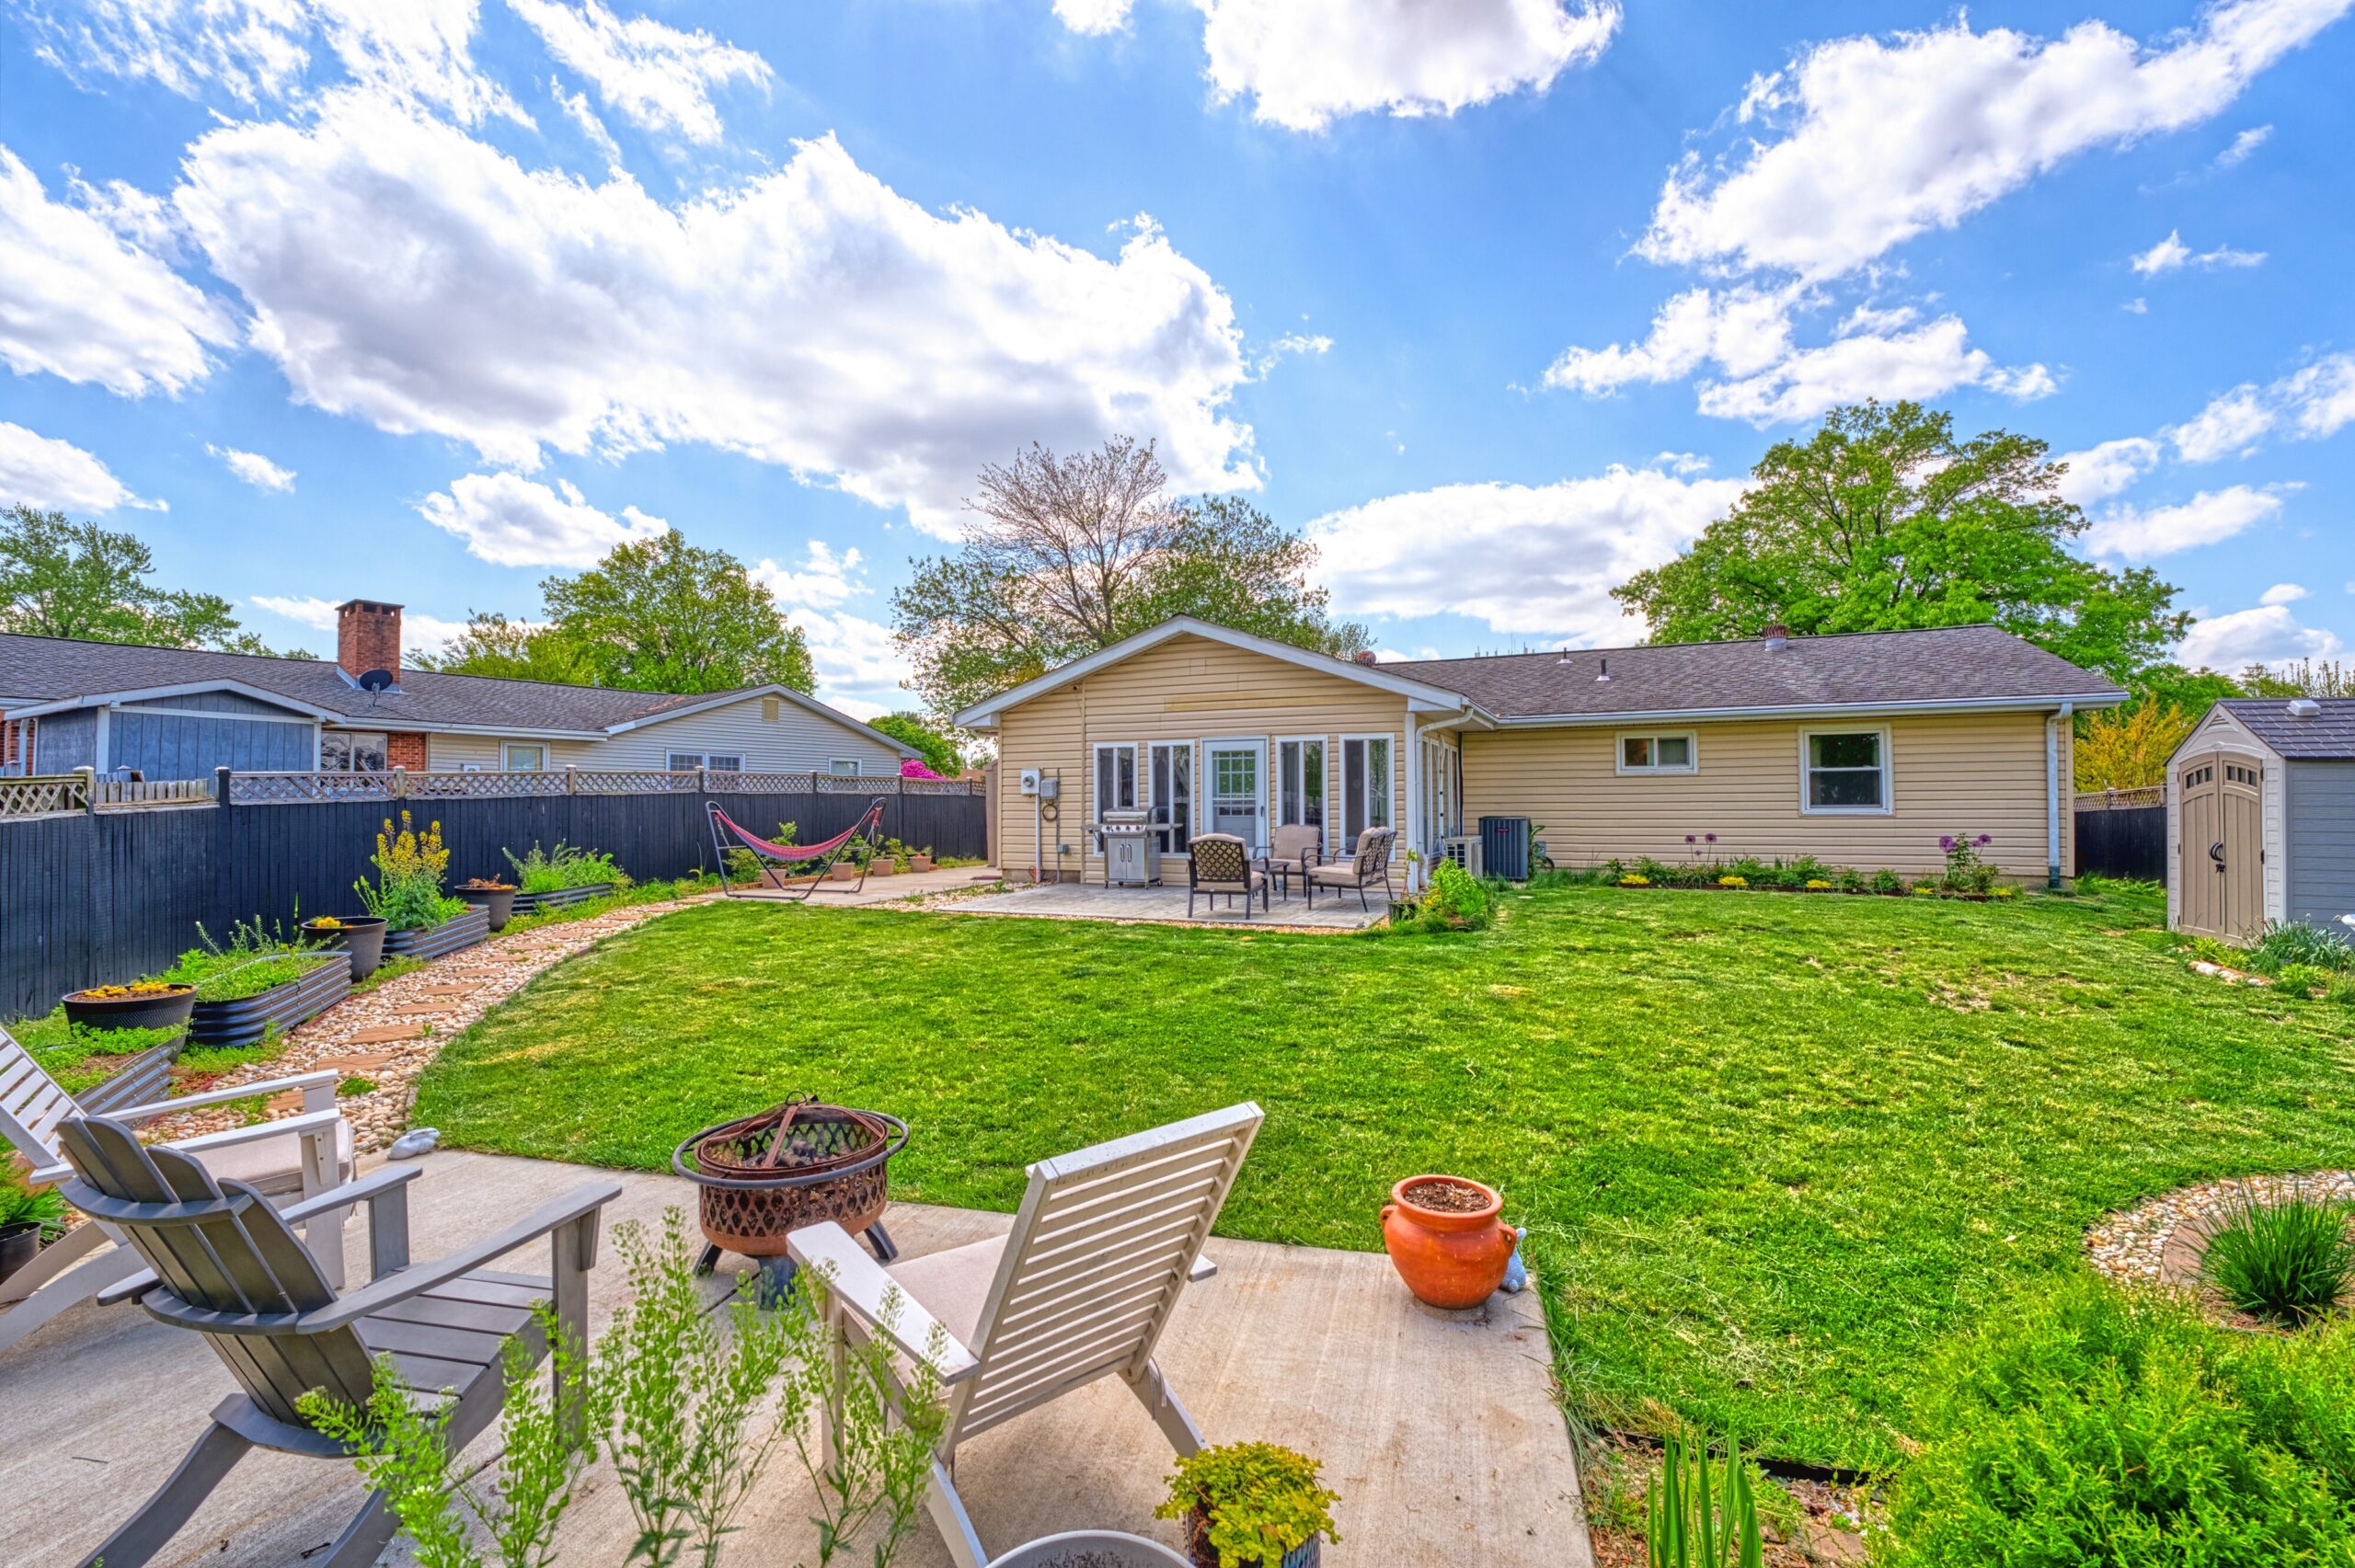 professional exterior photo of 102 S Harrison Road, Sterling, VA - showing the backyard view from the detached patio, looking back towards the home.